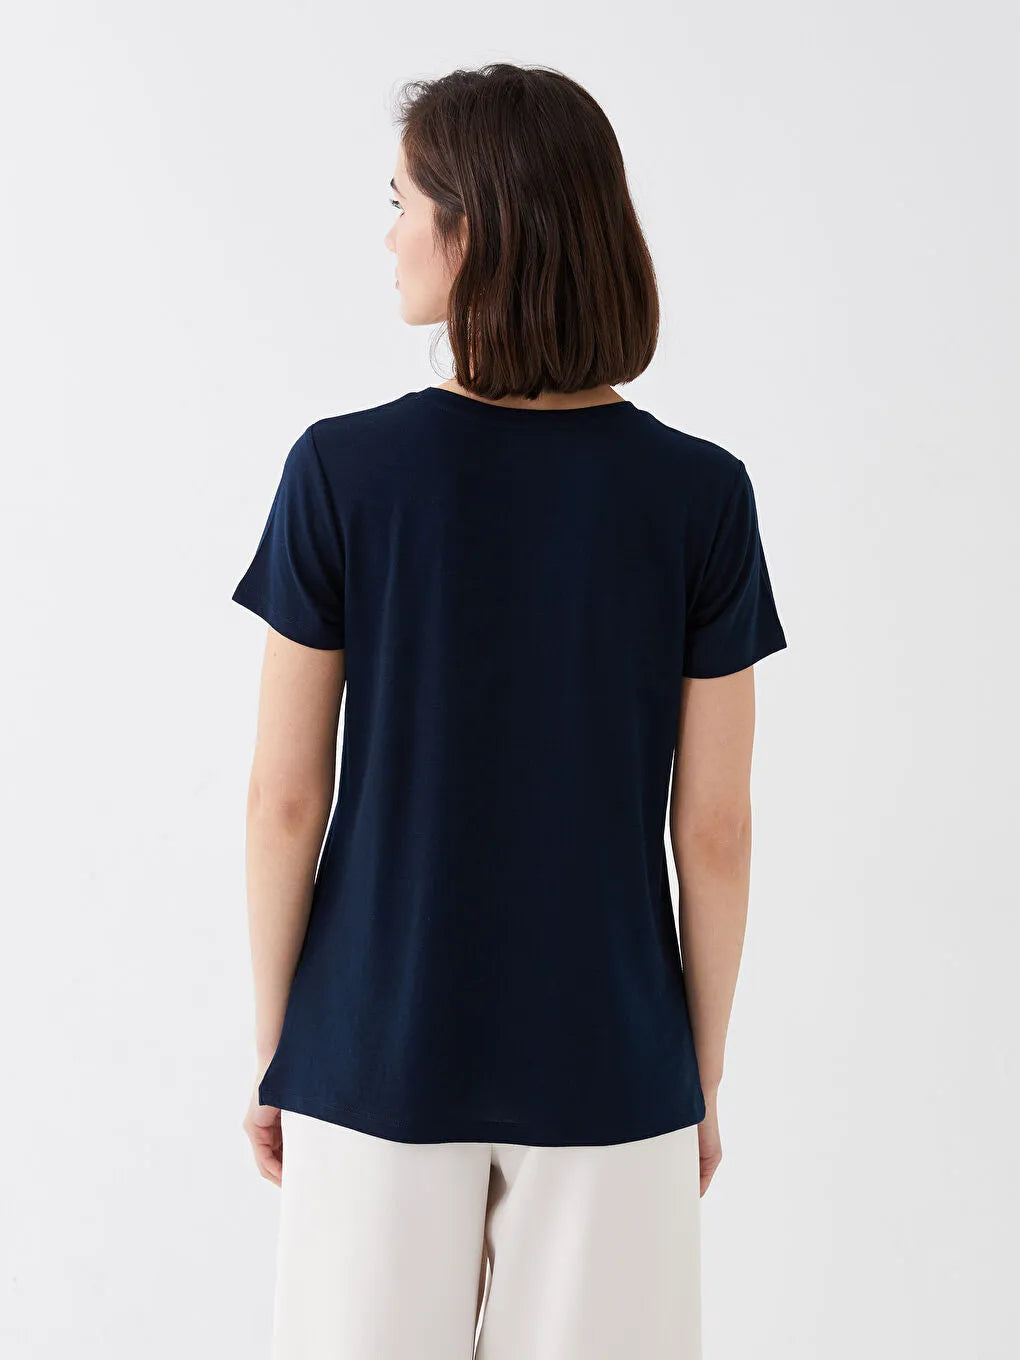 SILVER BUTTERFLY SEQUENCE NAVY BLUE TEE